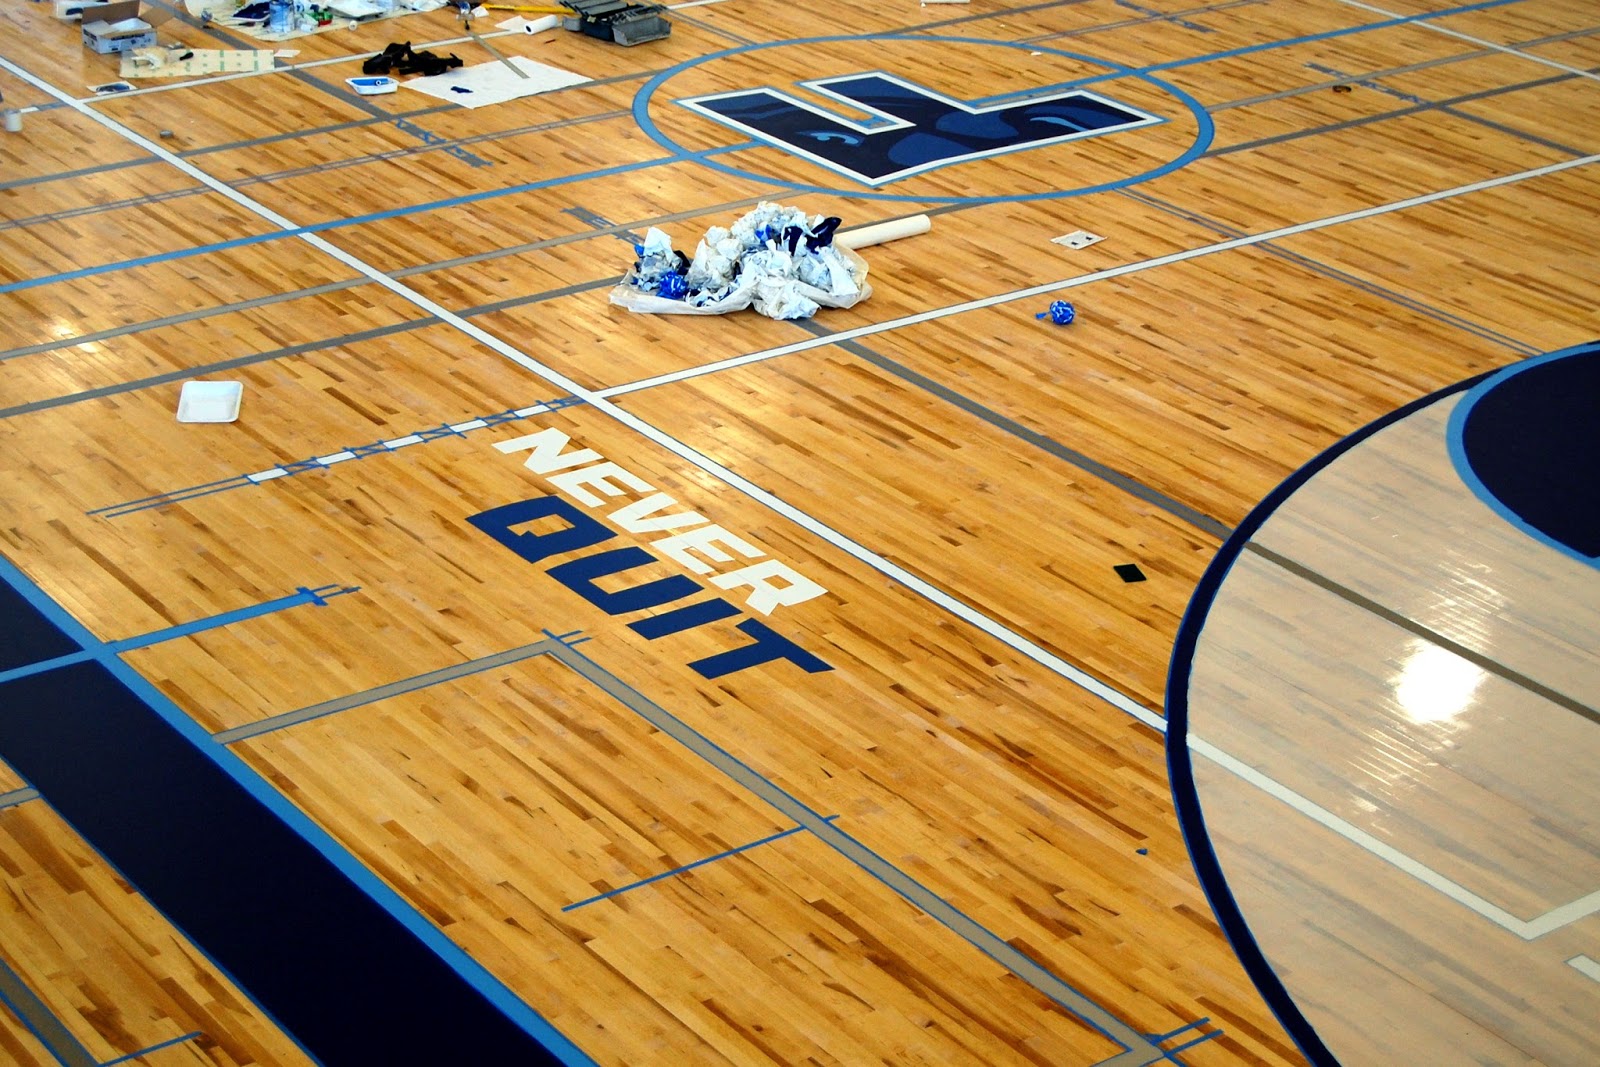 "never quit" written in on the gym floor